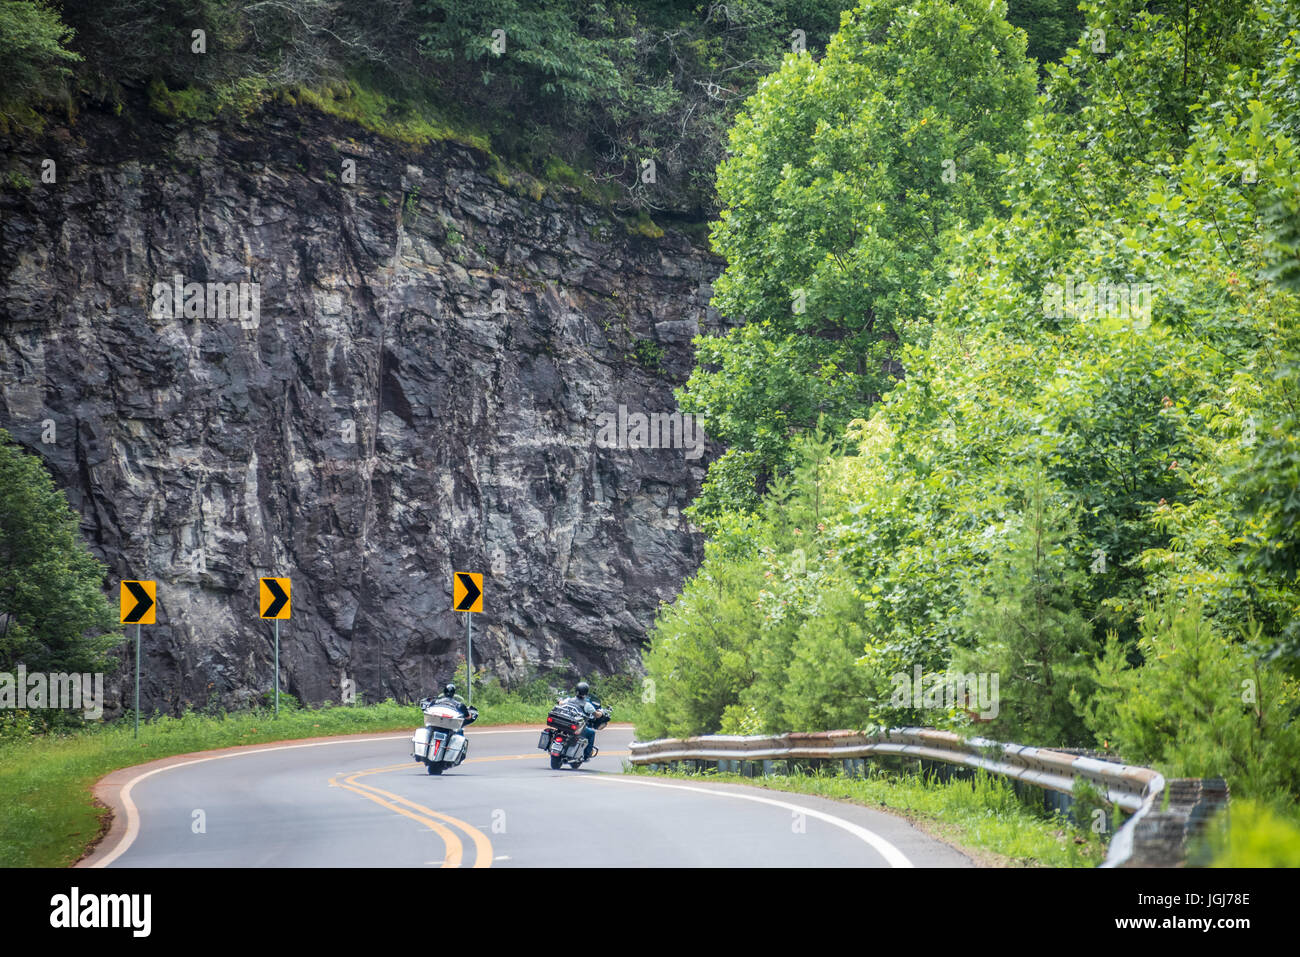 Two motorcyclists enjoying a summer mountain ride on the curvy Richard B. Russell Scenic Highway in the Blue Ridge Mountains of North Georgia. (USA) Stock Photo